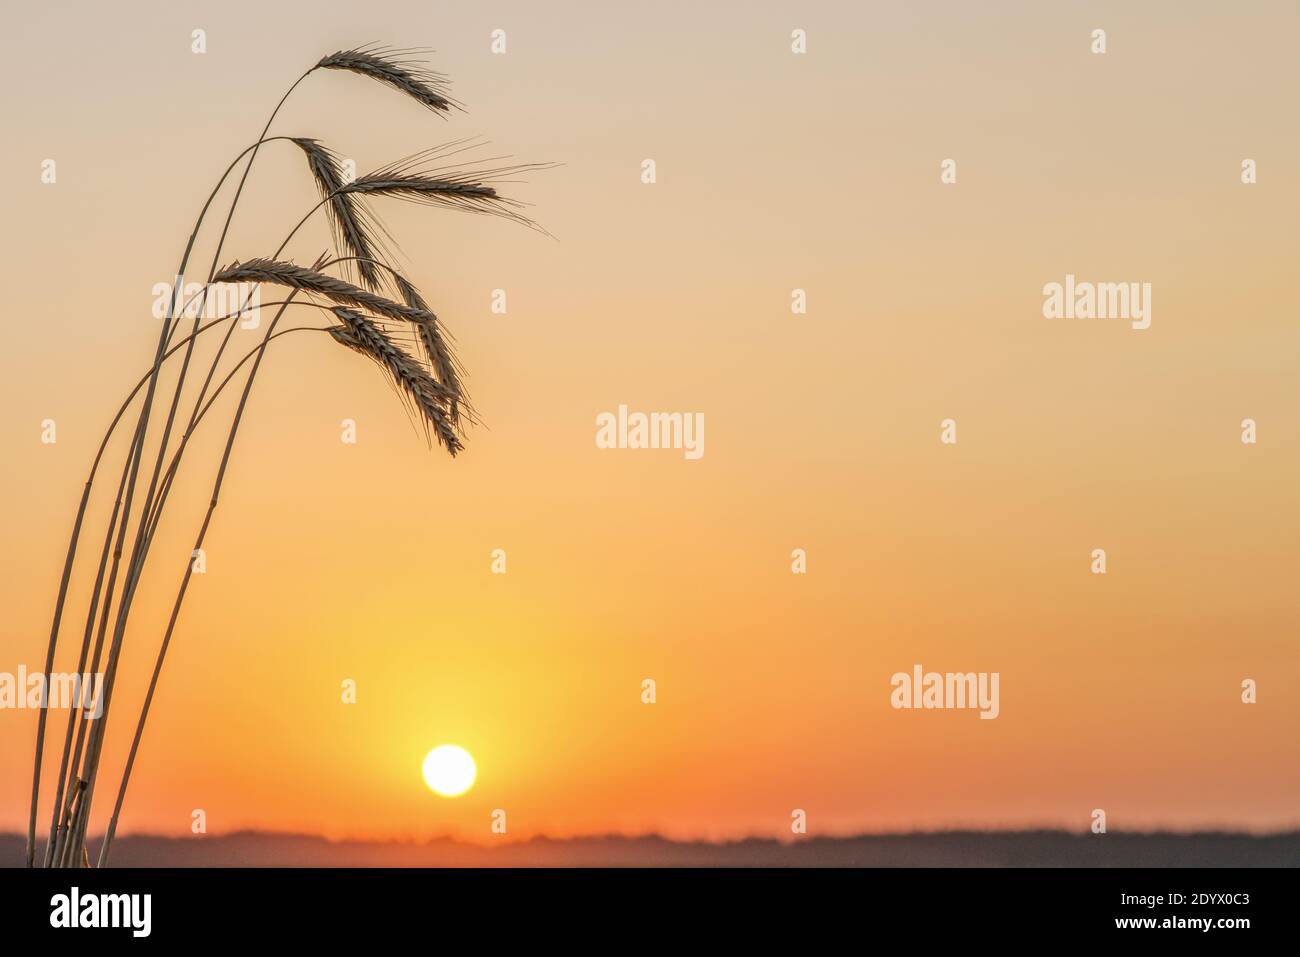 Spikelets of wheat in a field at sunrise. Stock Photo